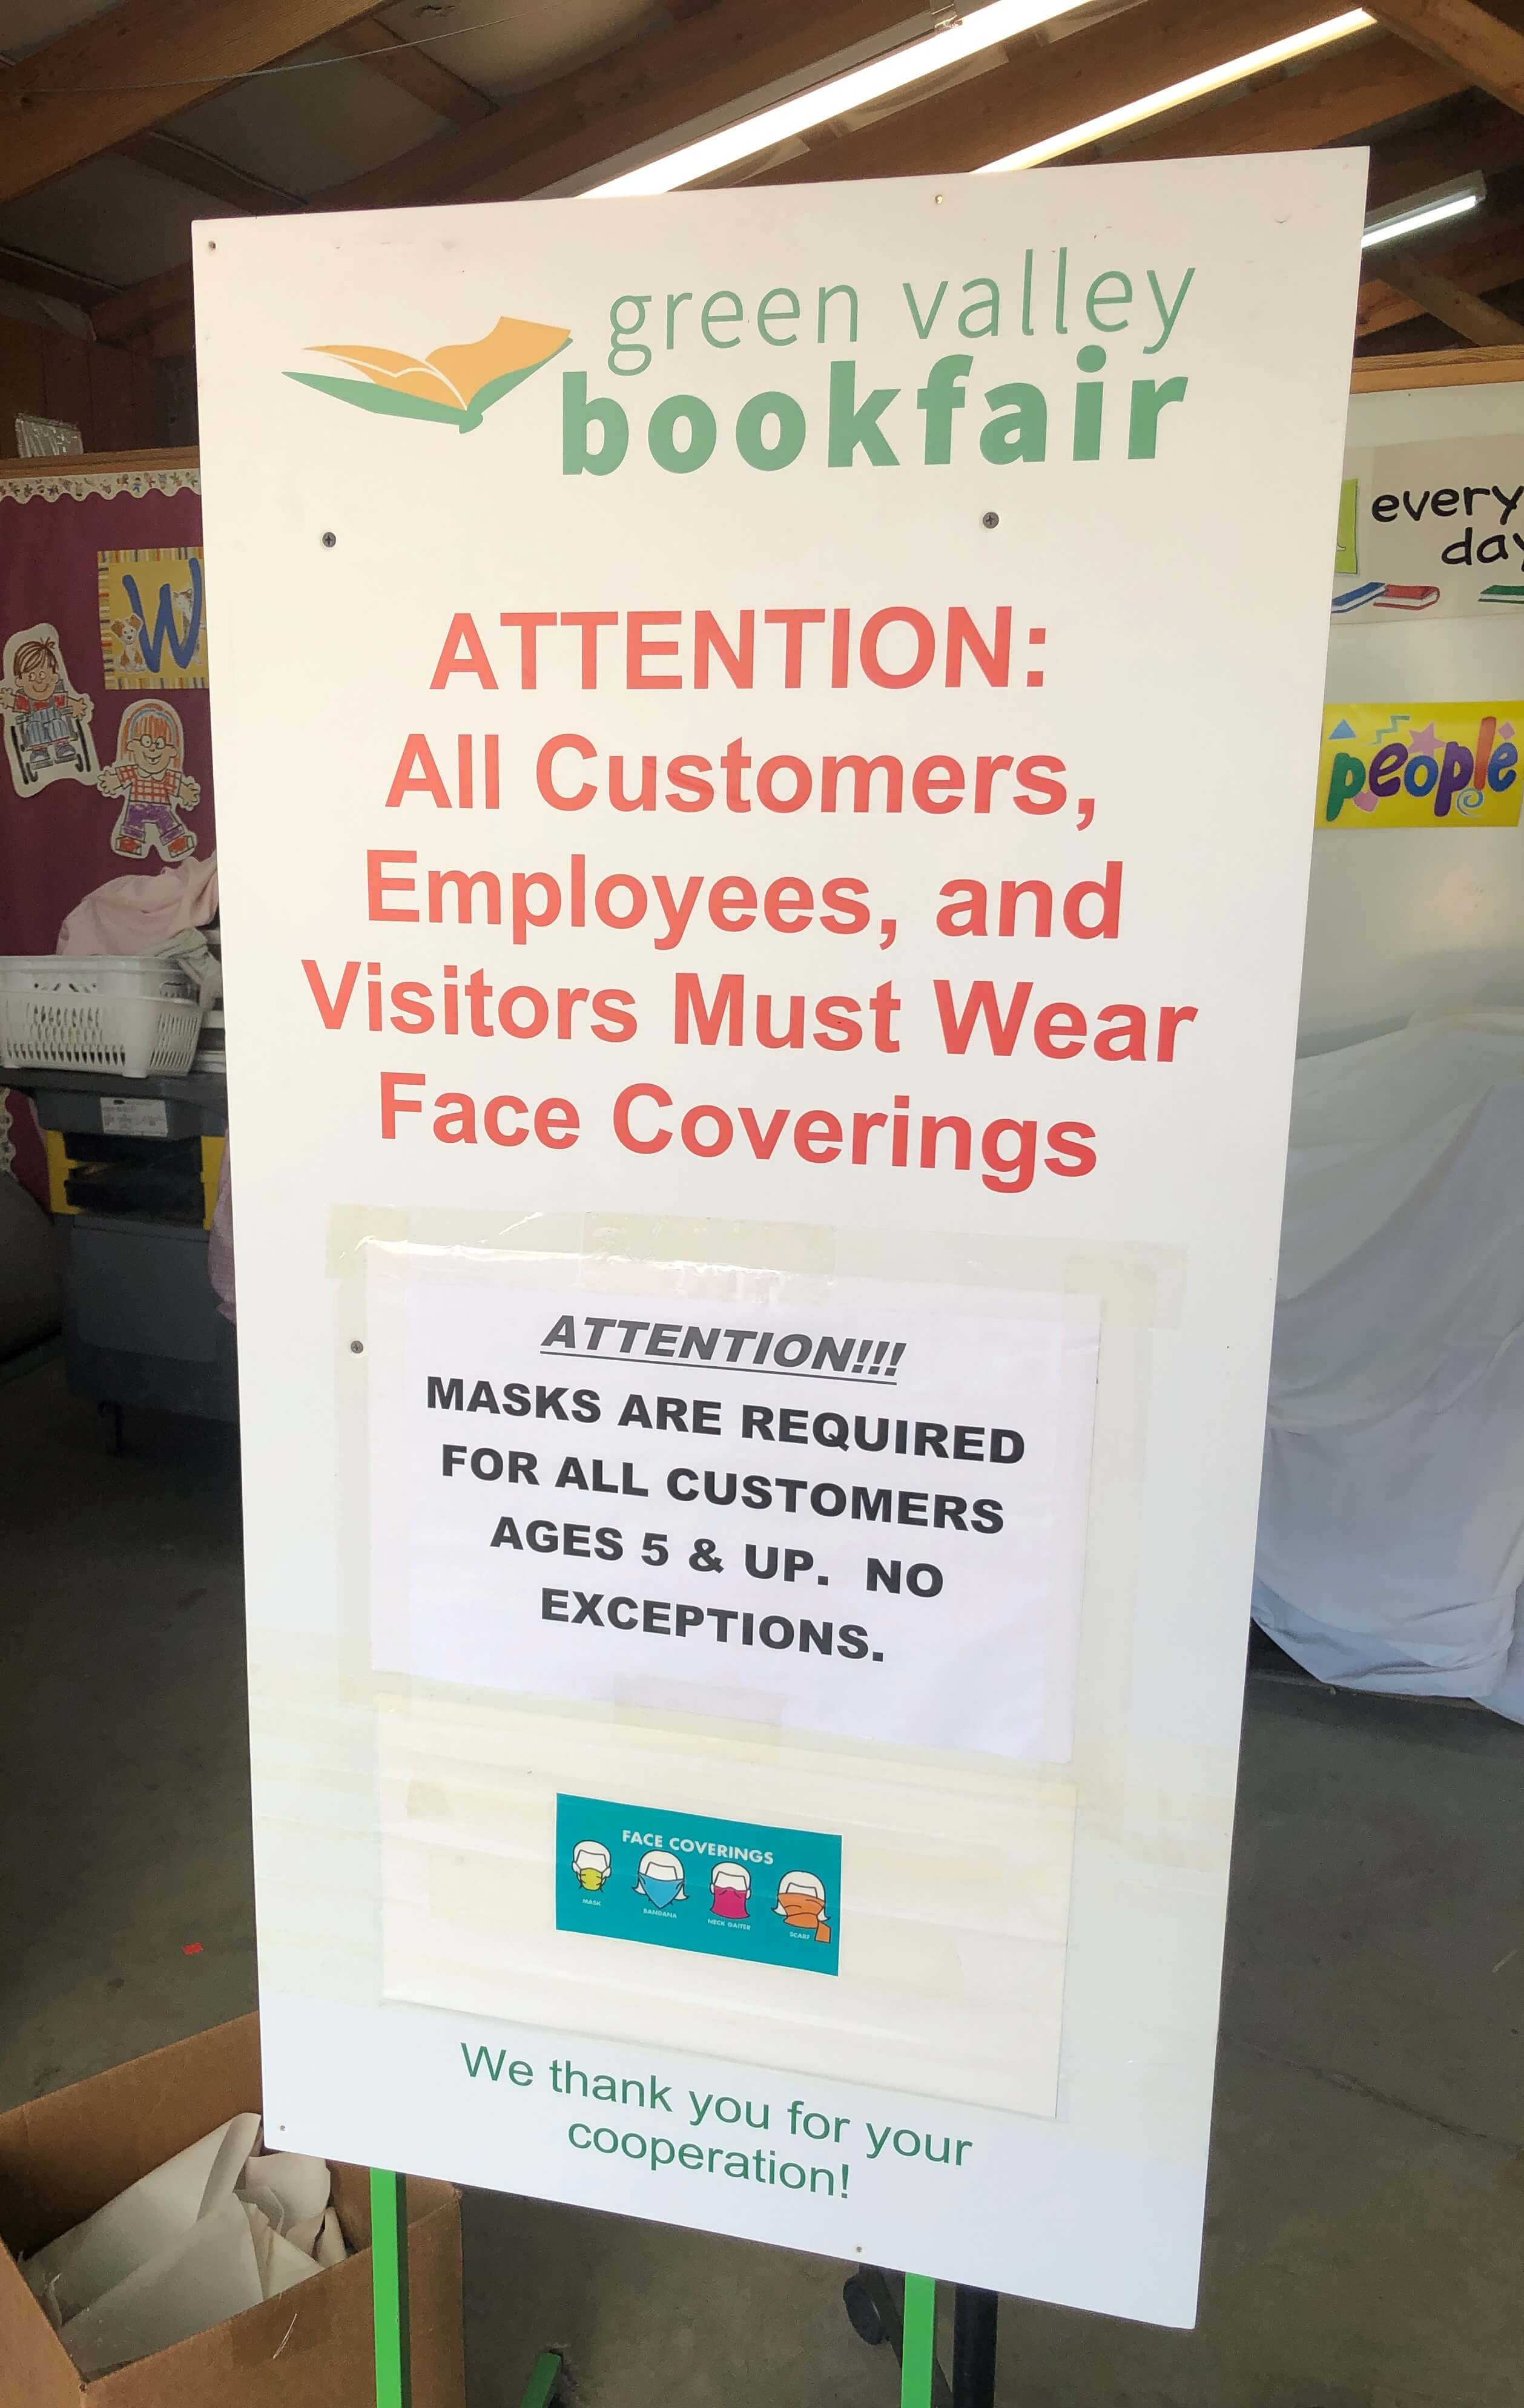 a sign that reads
"Green Valley Book Fair
Attention: All Customers, Employees, and Visitors Must Wear Face Coverings

Attention!!!
Masks are required for all customers ages 5 & up. No exceptions.

We thank you for your cooperation!"